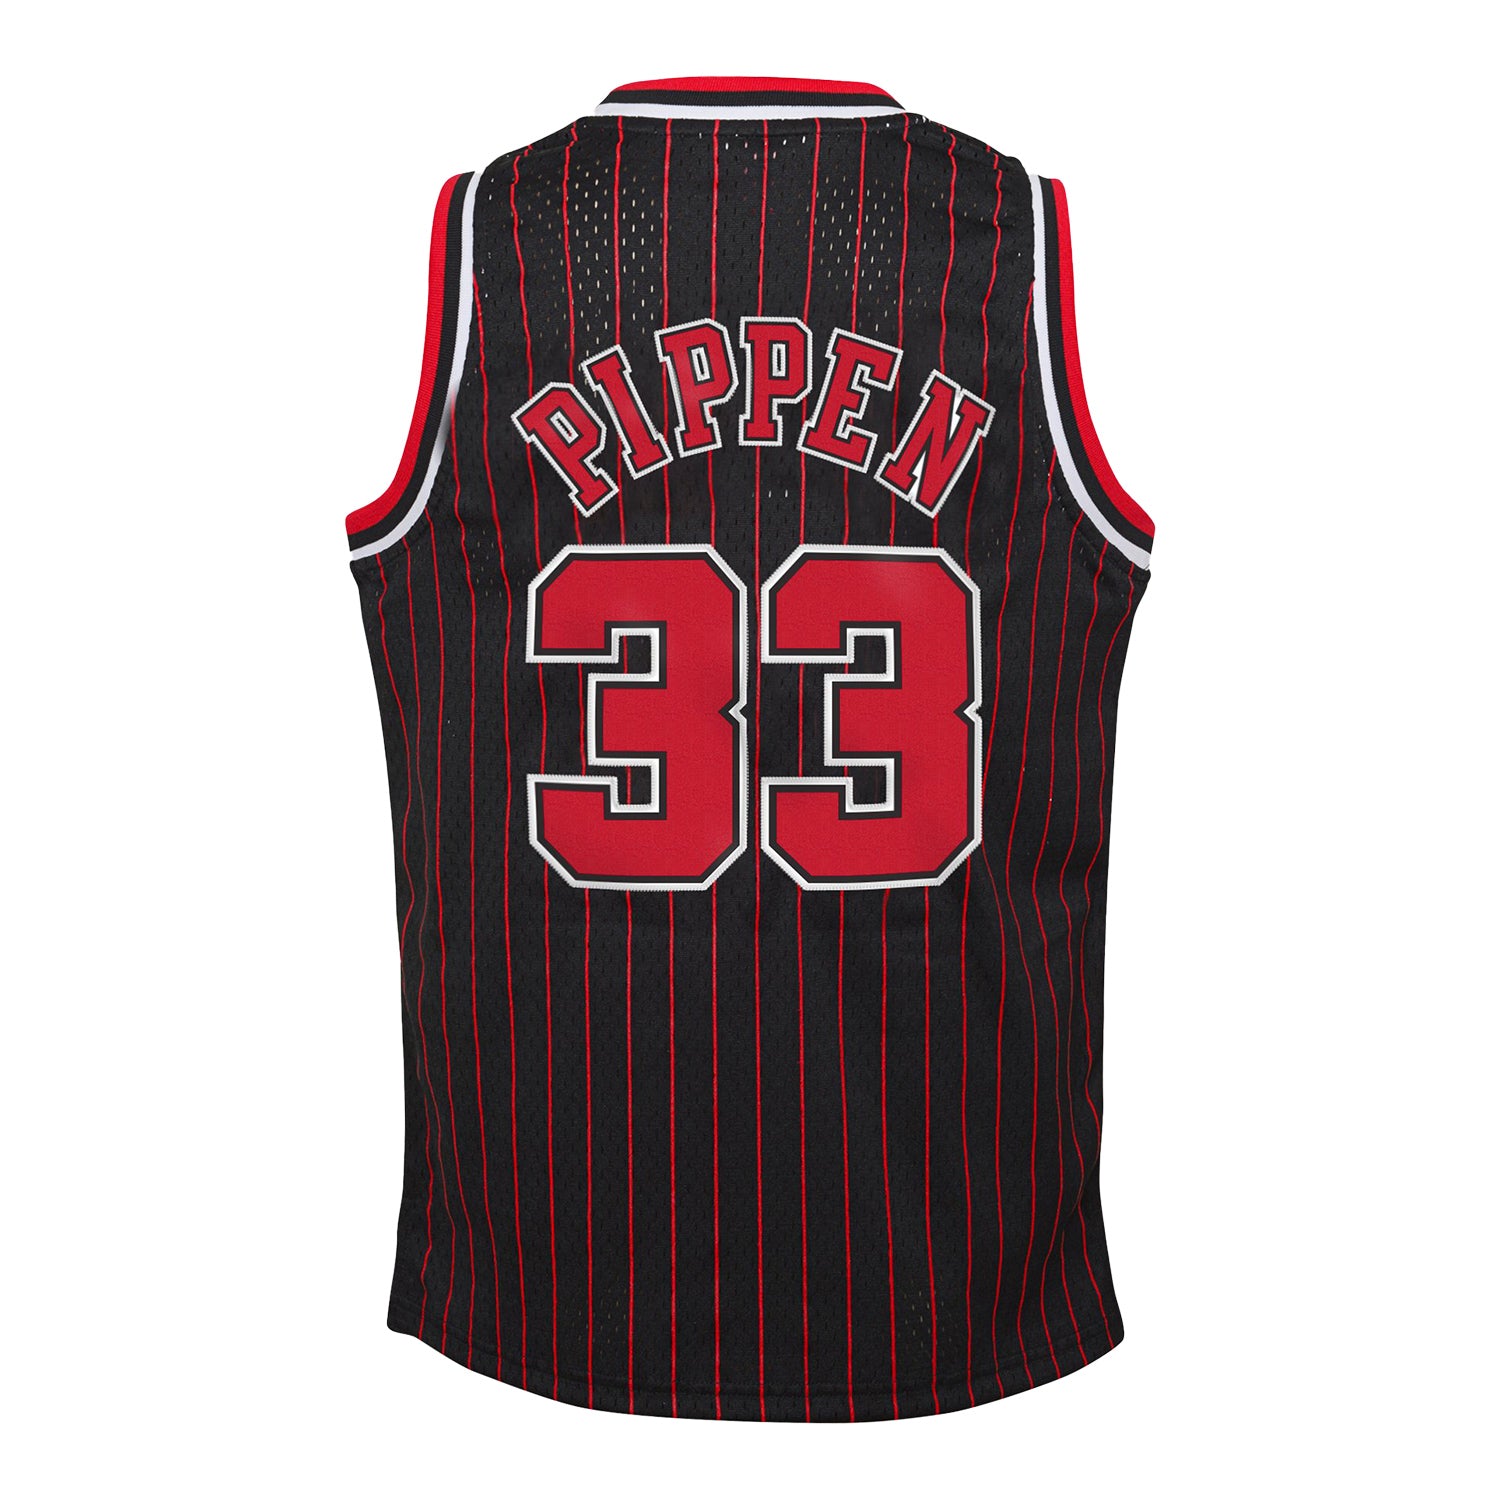 Youth Chicago Bulls Authentic Mitchell & Ness Scottie Pippen 1995-96 Jersey - back view